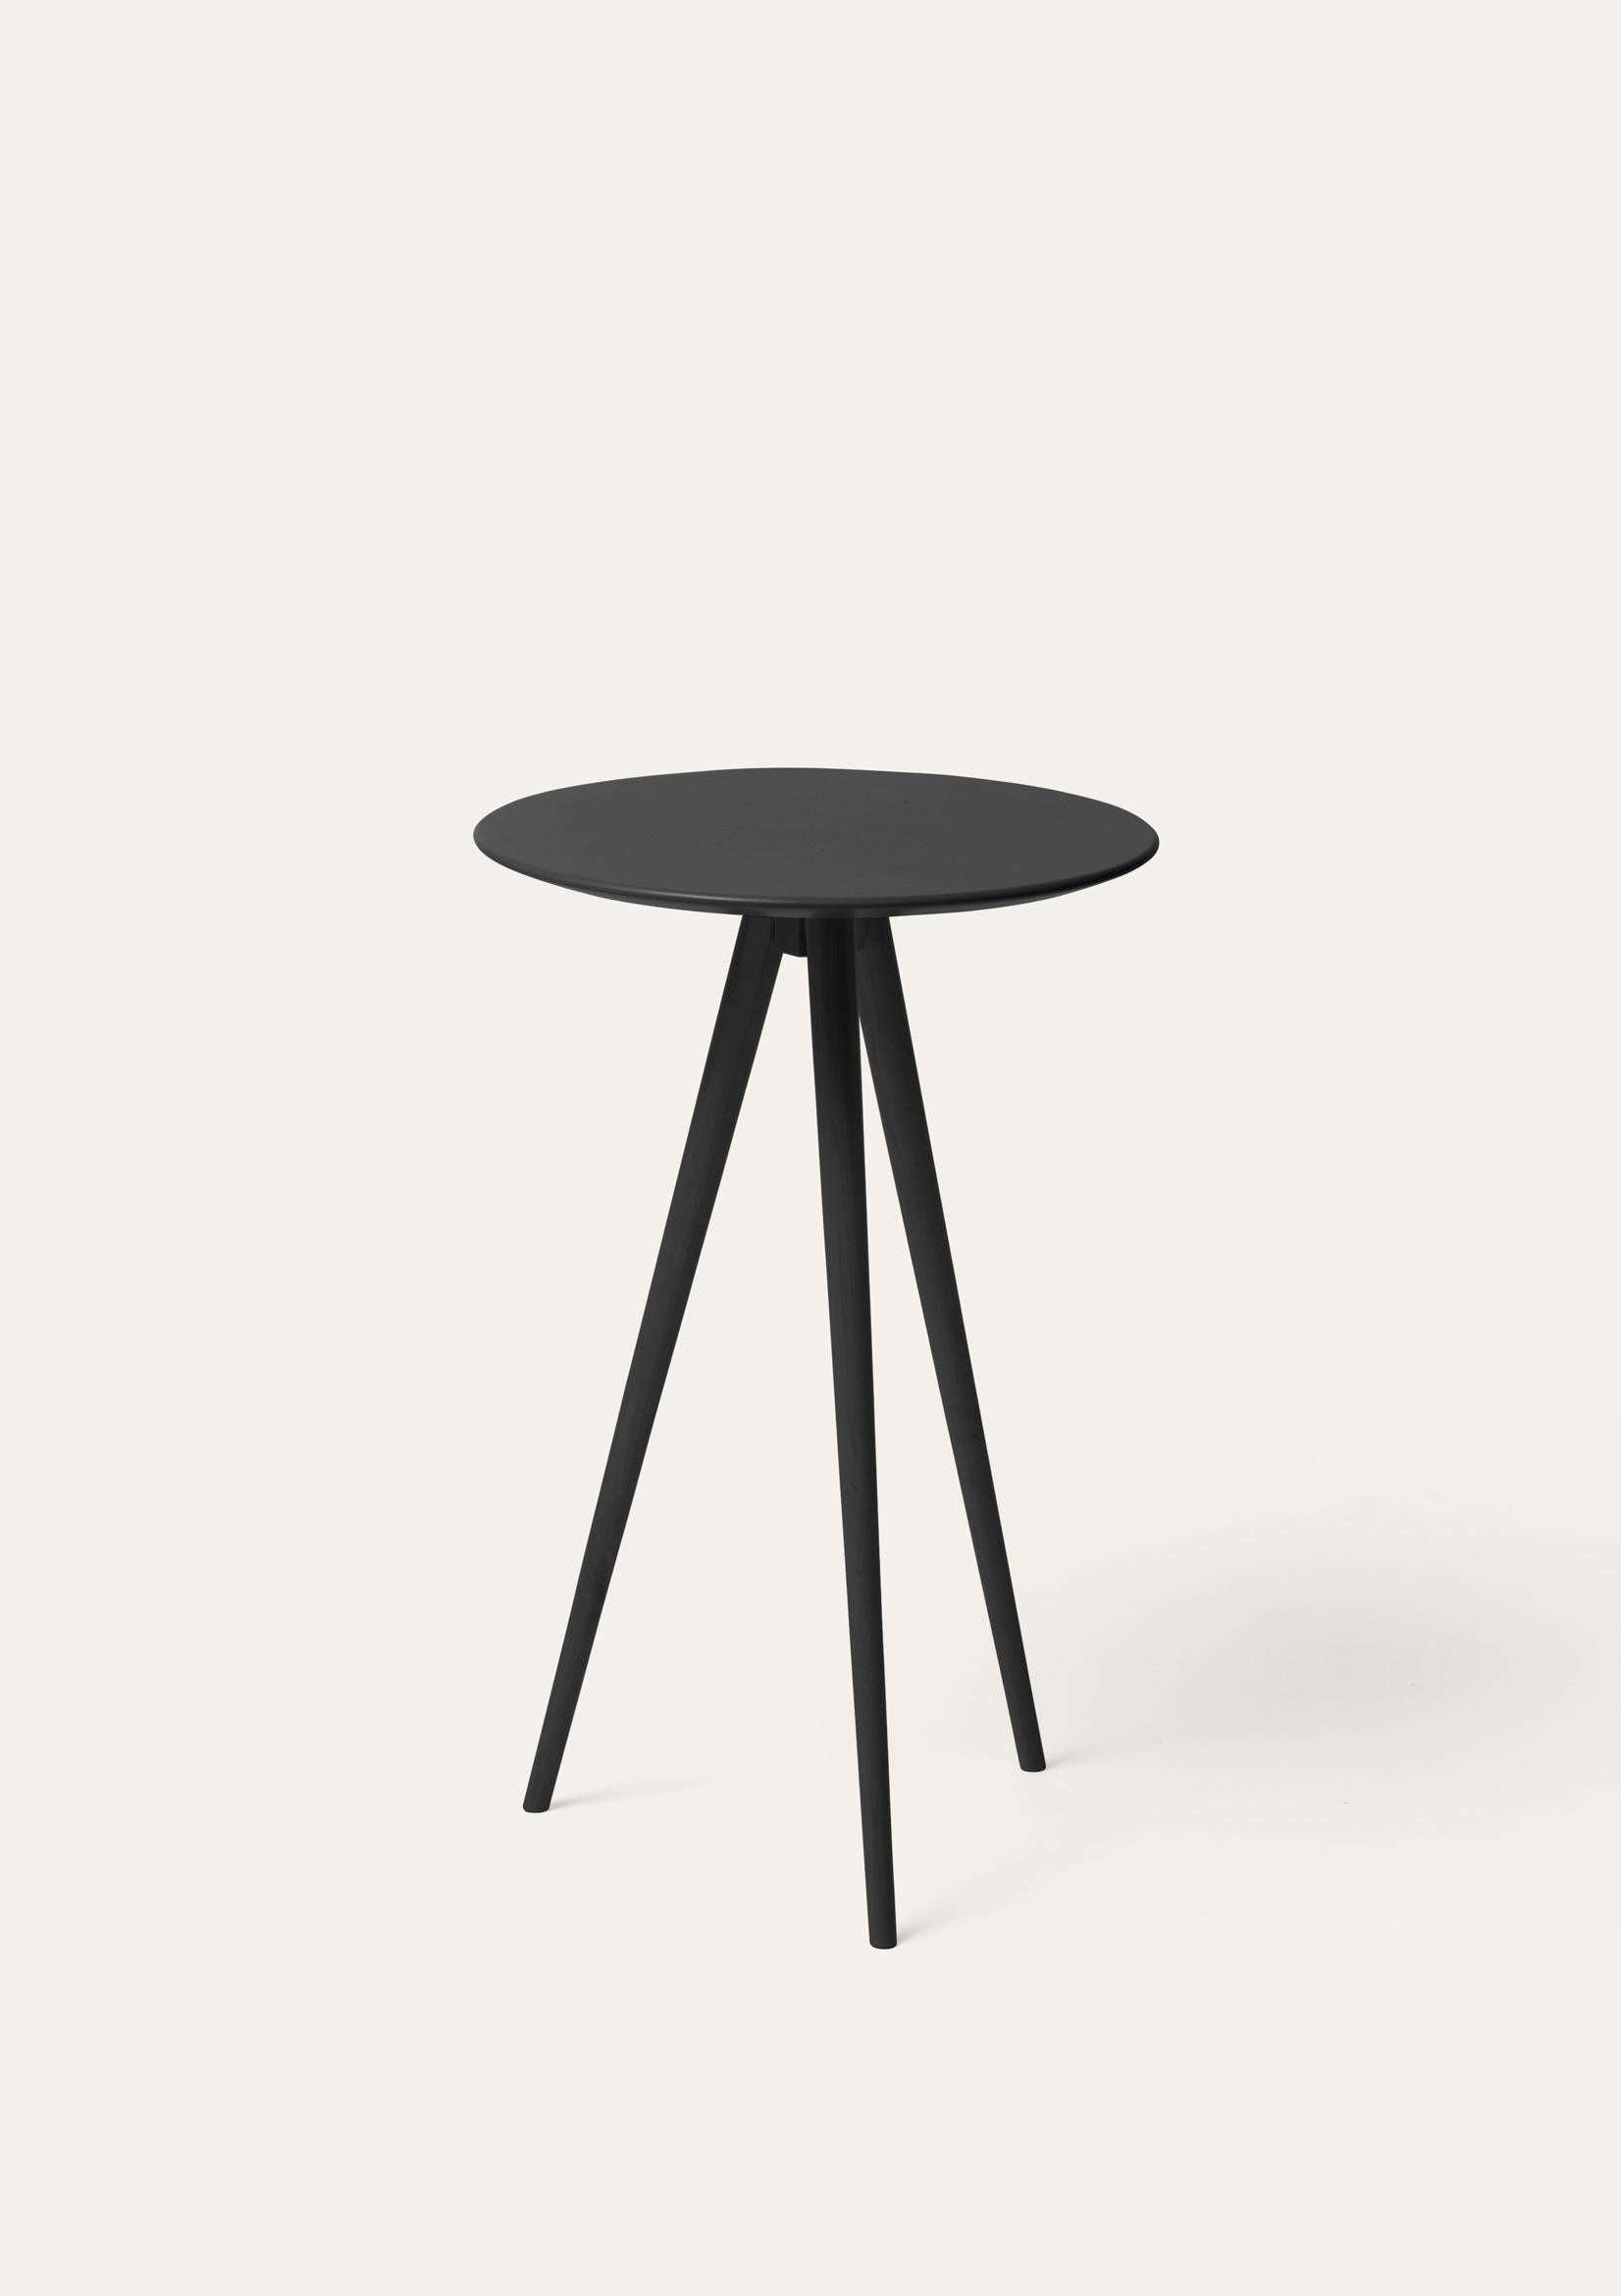 Black Trip side table by Storängen Design
Dimensions: D 35 x H 62 cm
Materials: birch wood.
Also available in other colors.

Trip is our smallest table, a lightweight three-legged surface entirely made of birch. A decorative item that can be